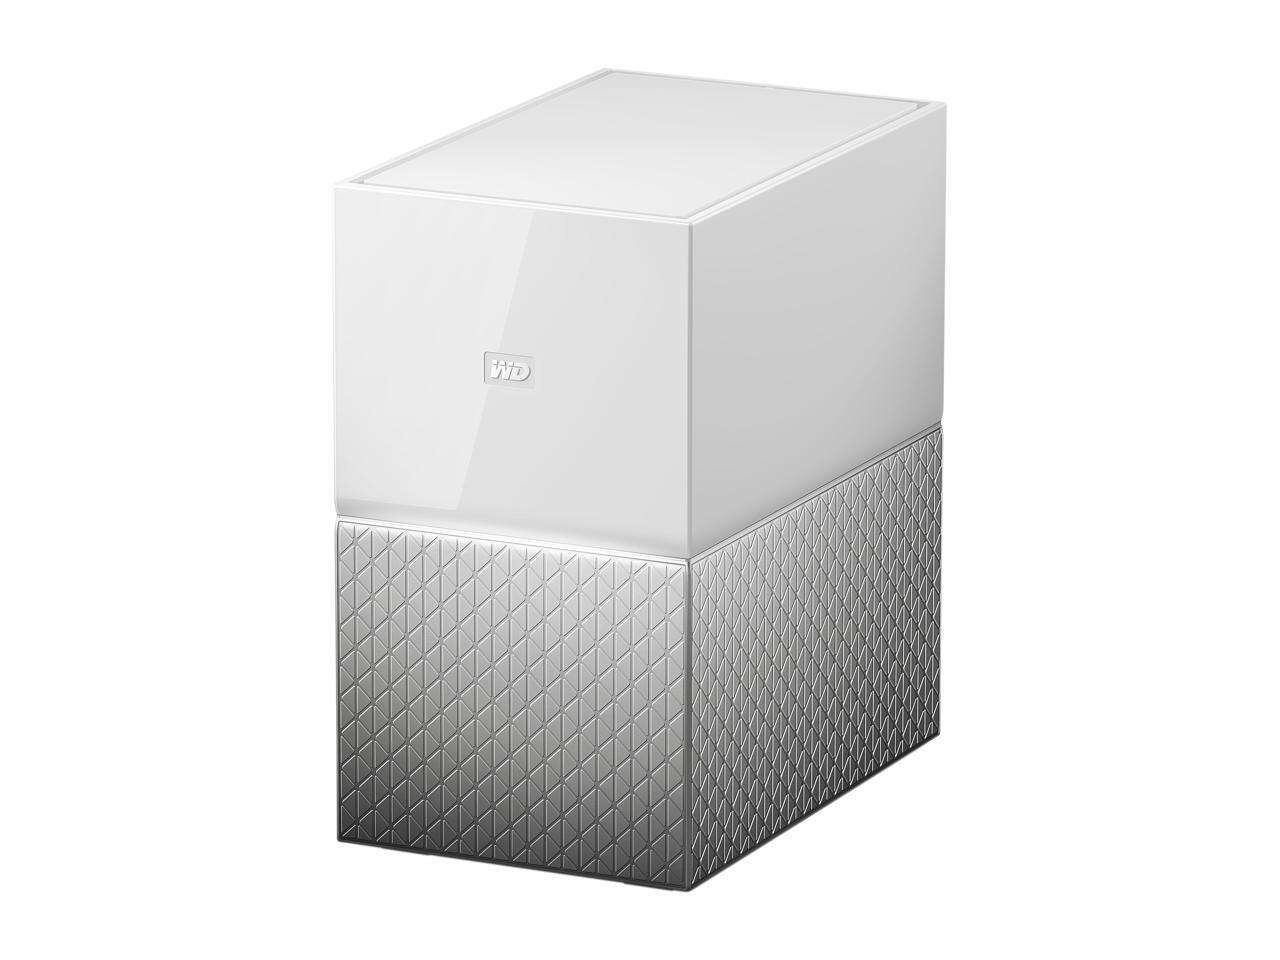 WD 16TB My Cloud Home Duo Personal Cloud Storage (iOS/Android & Mac/PC Compatible) - (WDBMUT0160JWT-NESN)